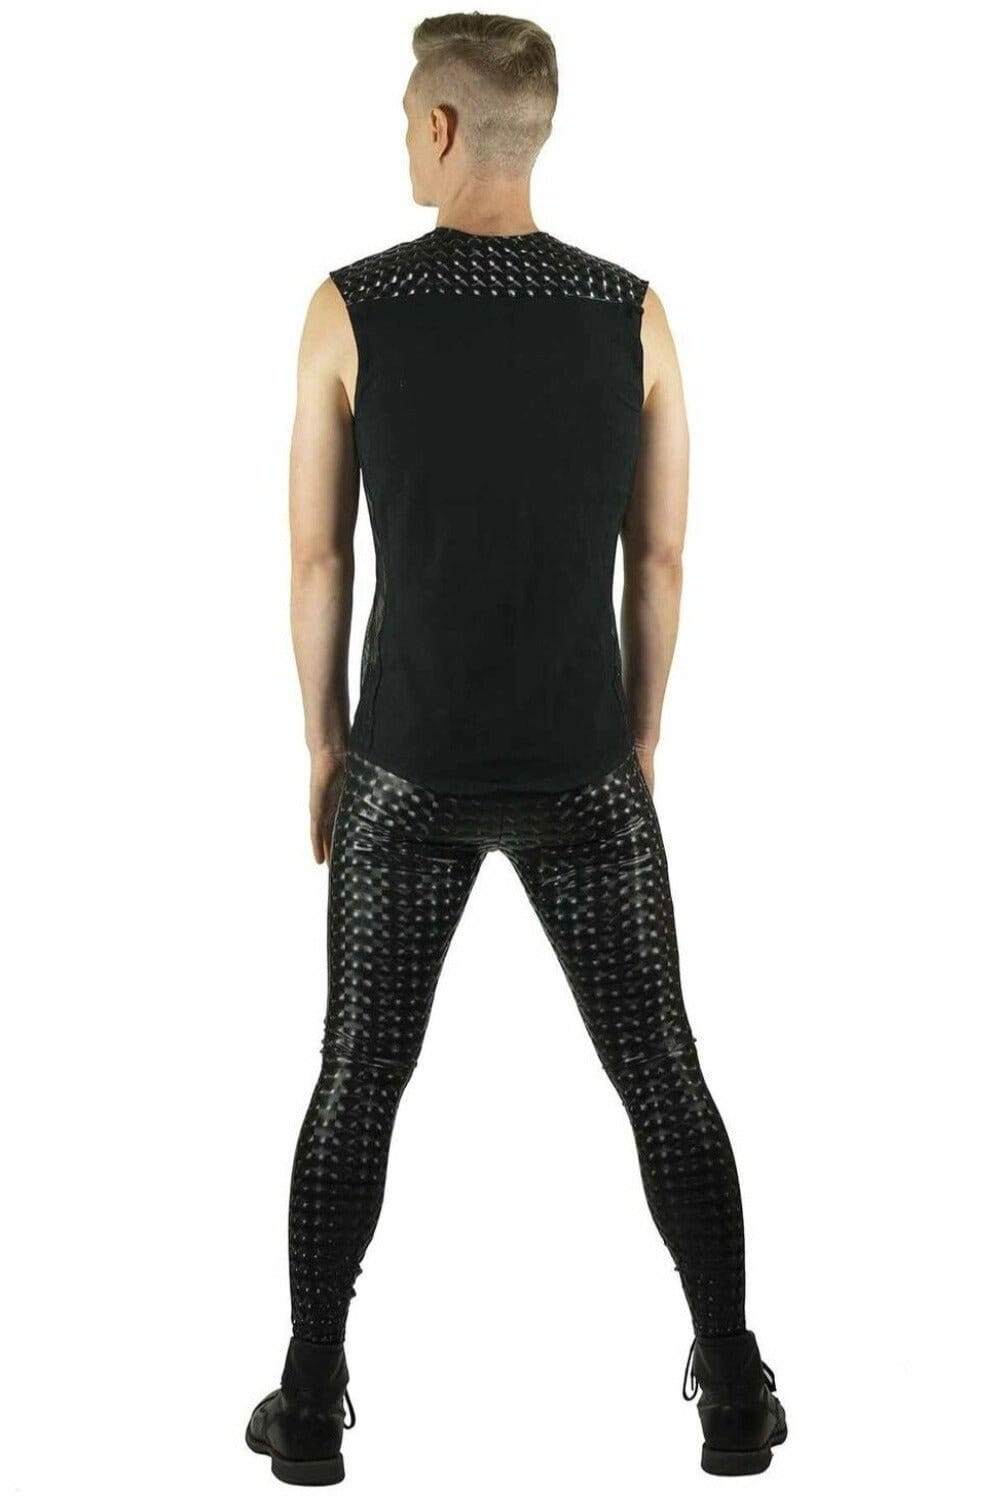 cyber goth rave mens outfit by Love Khaos